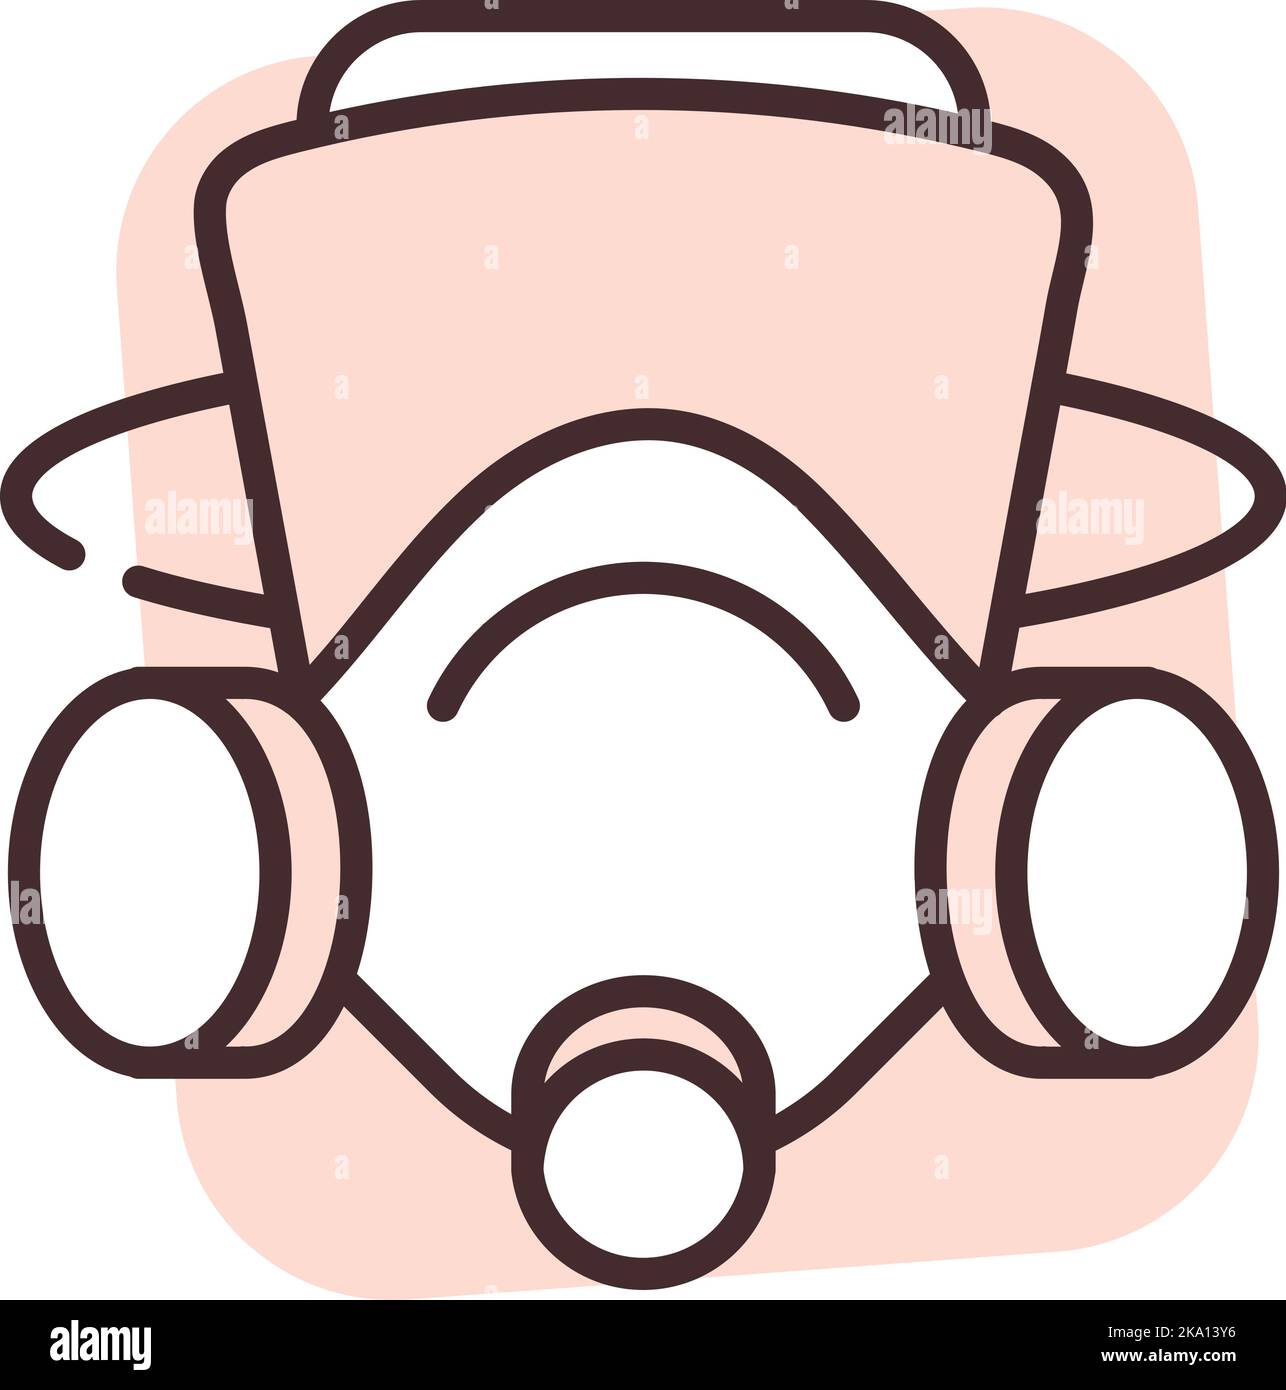 Purification gas mask, illustration or icon, vector on white background. Stock Vector